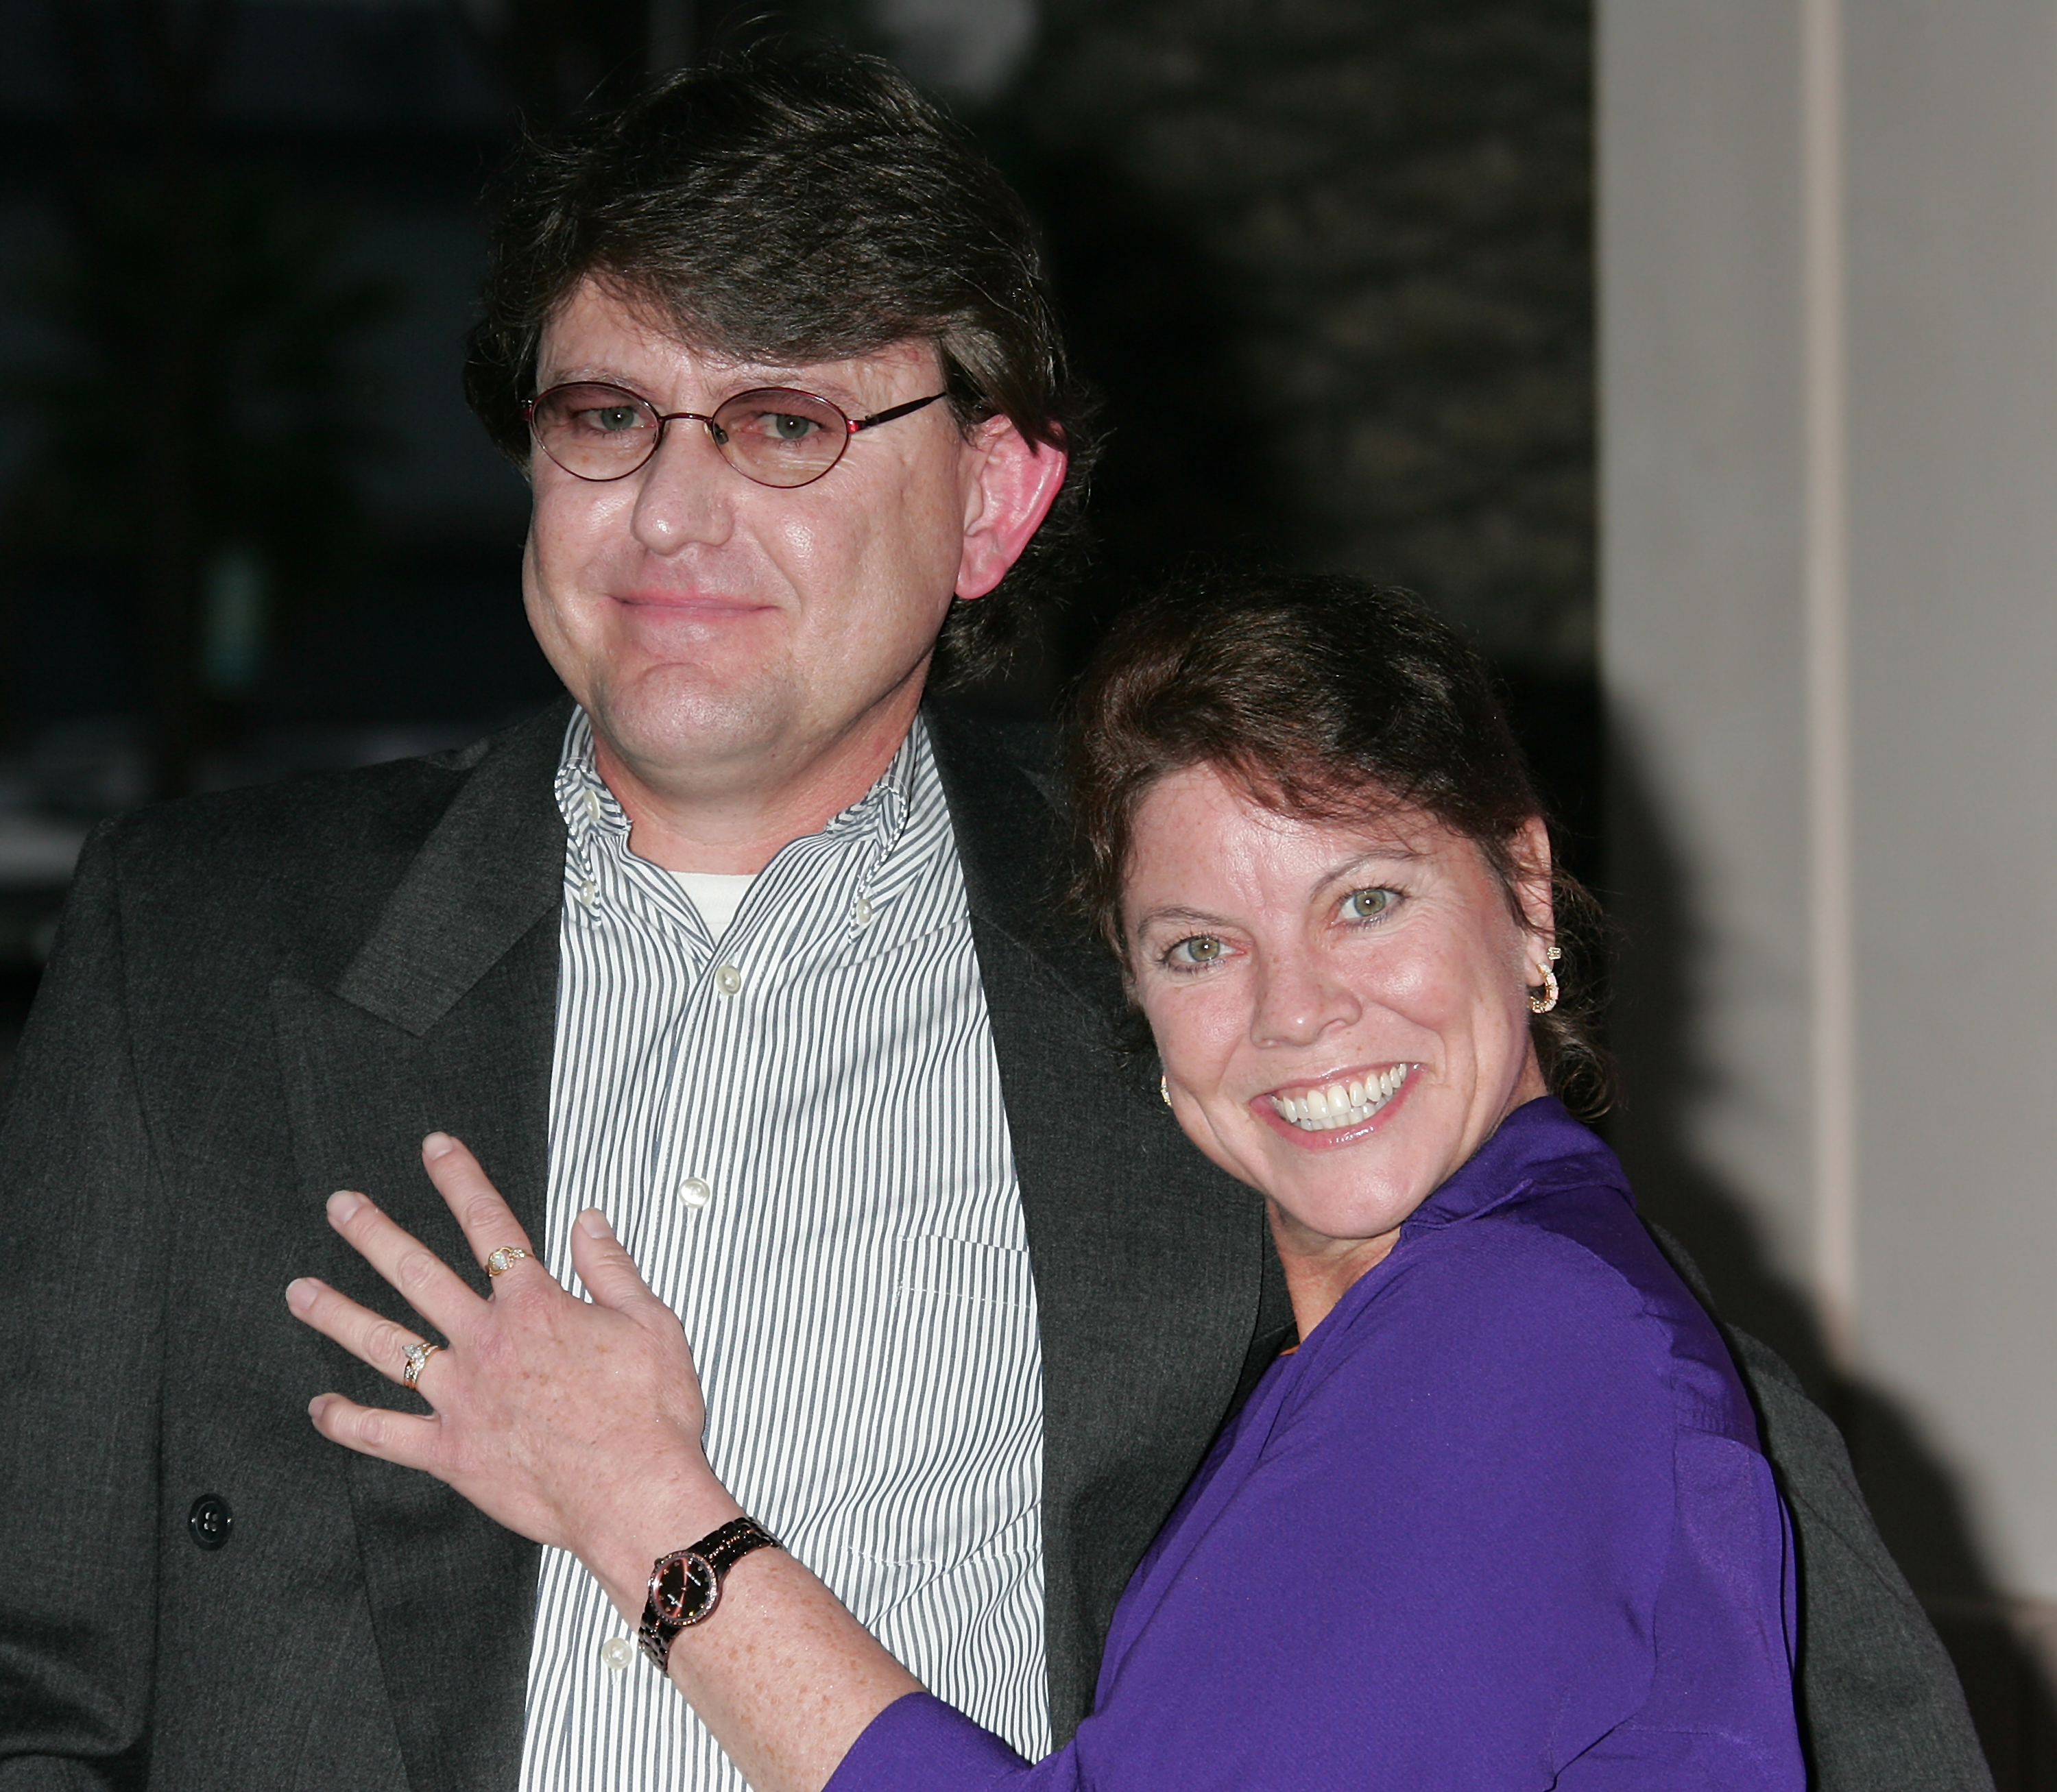 Erin Moran (R) and her husband Steven Fleischmann in North Hollywood, California on May 6, 2008 | Source: Getty Images